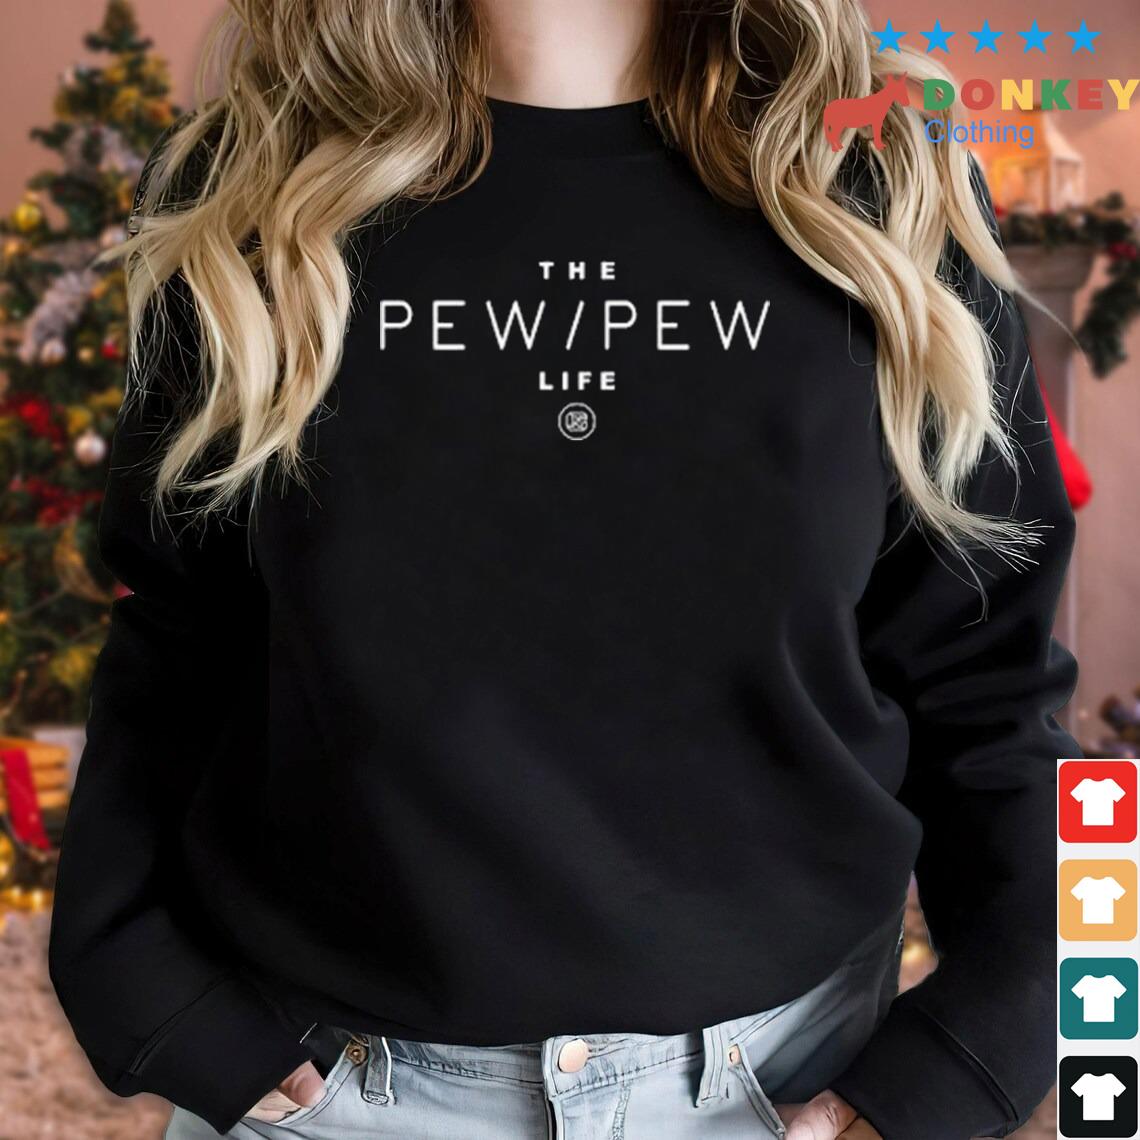 The Pew Pew Life Shirt